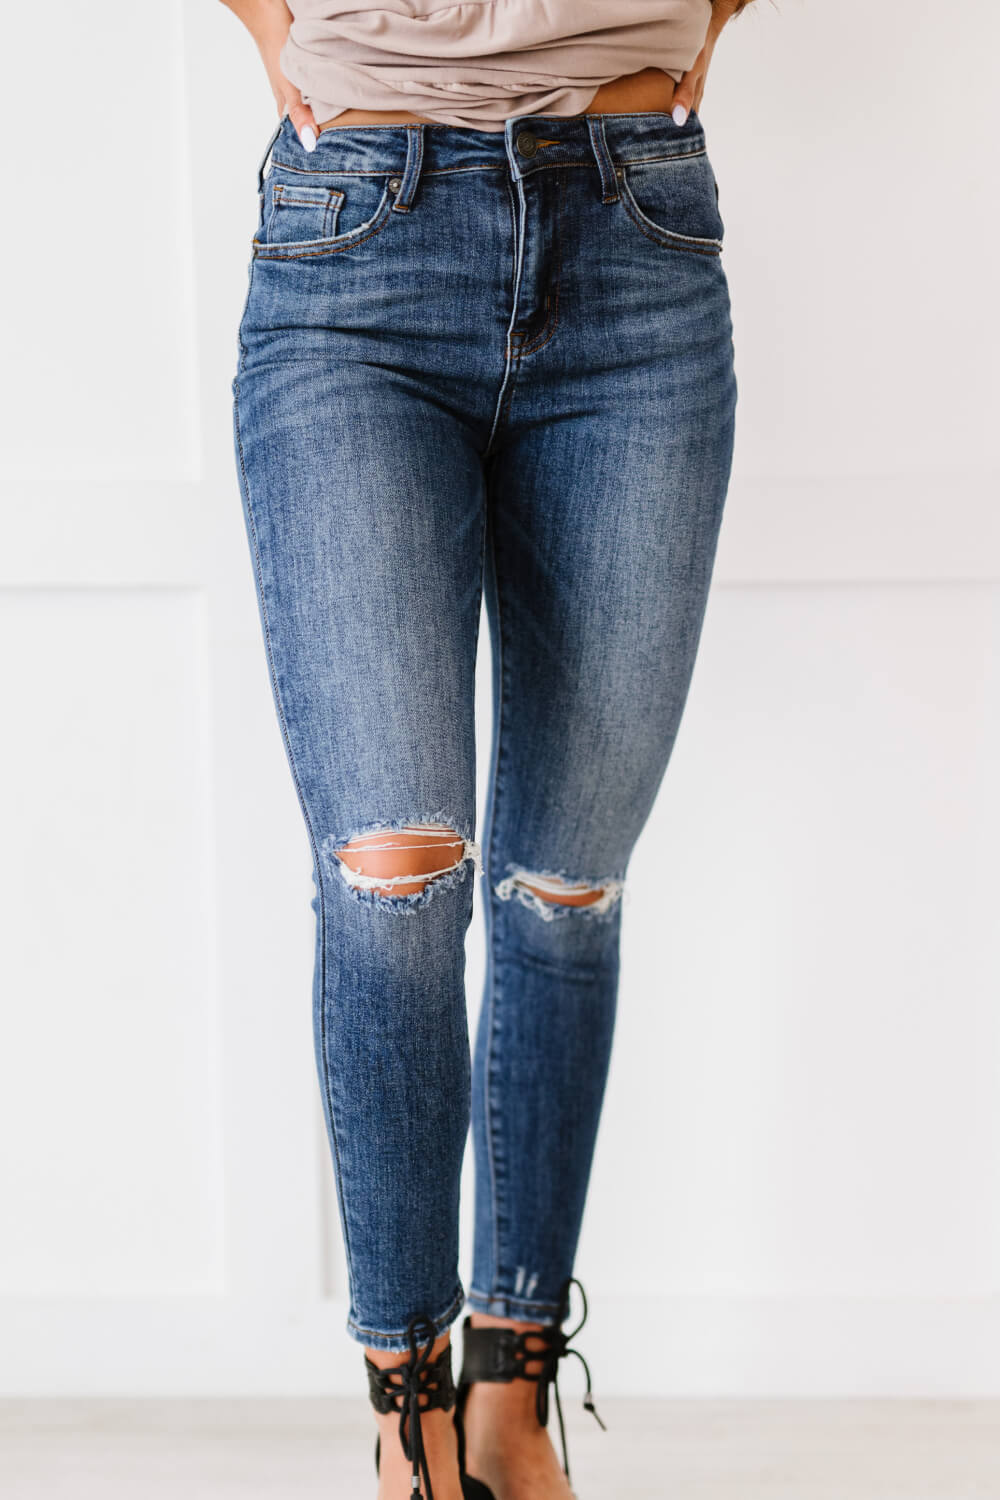 RISEN Amber High-Waisted Distressed Skinny Jeans